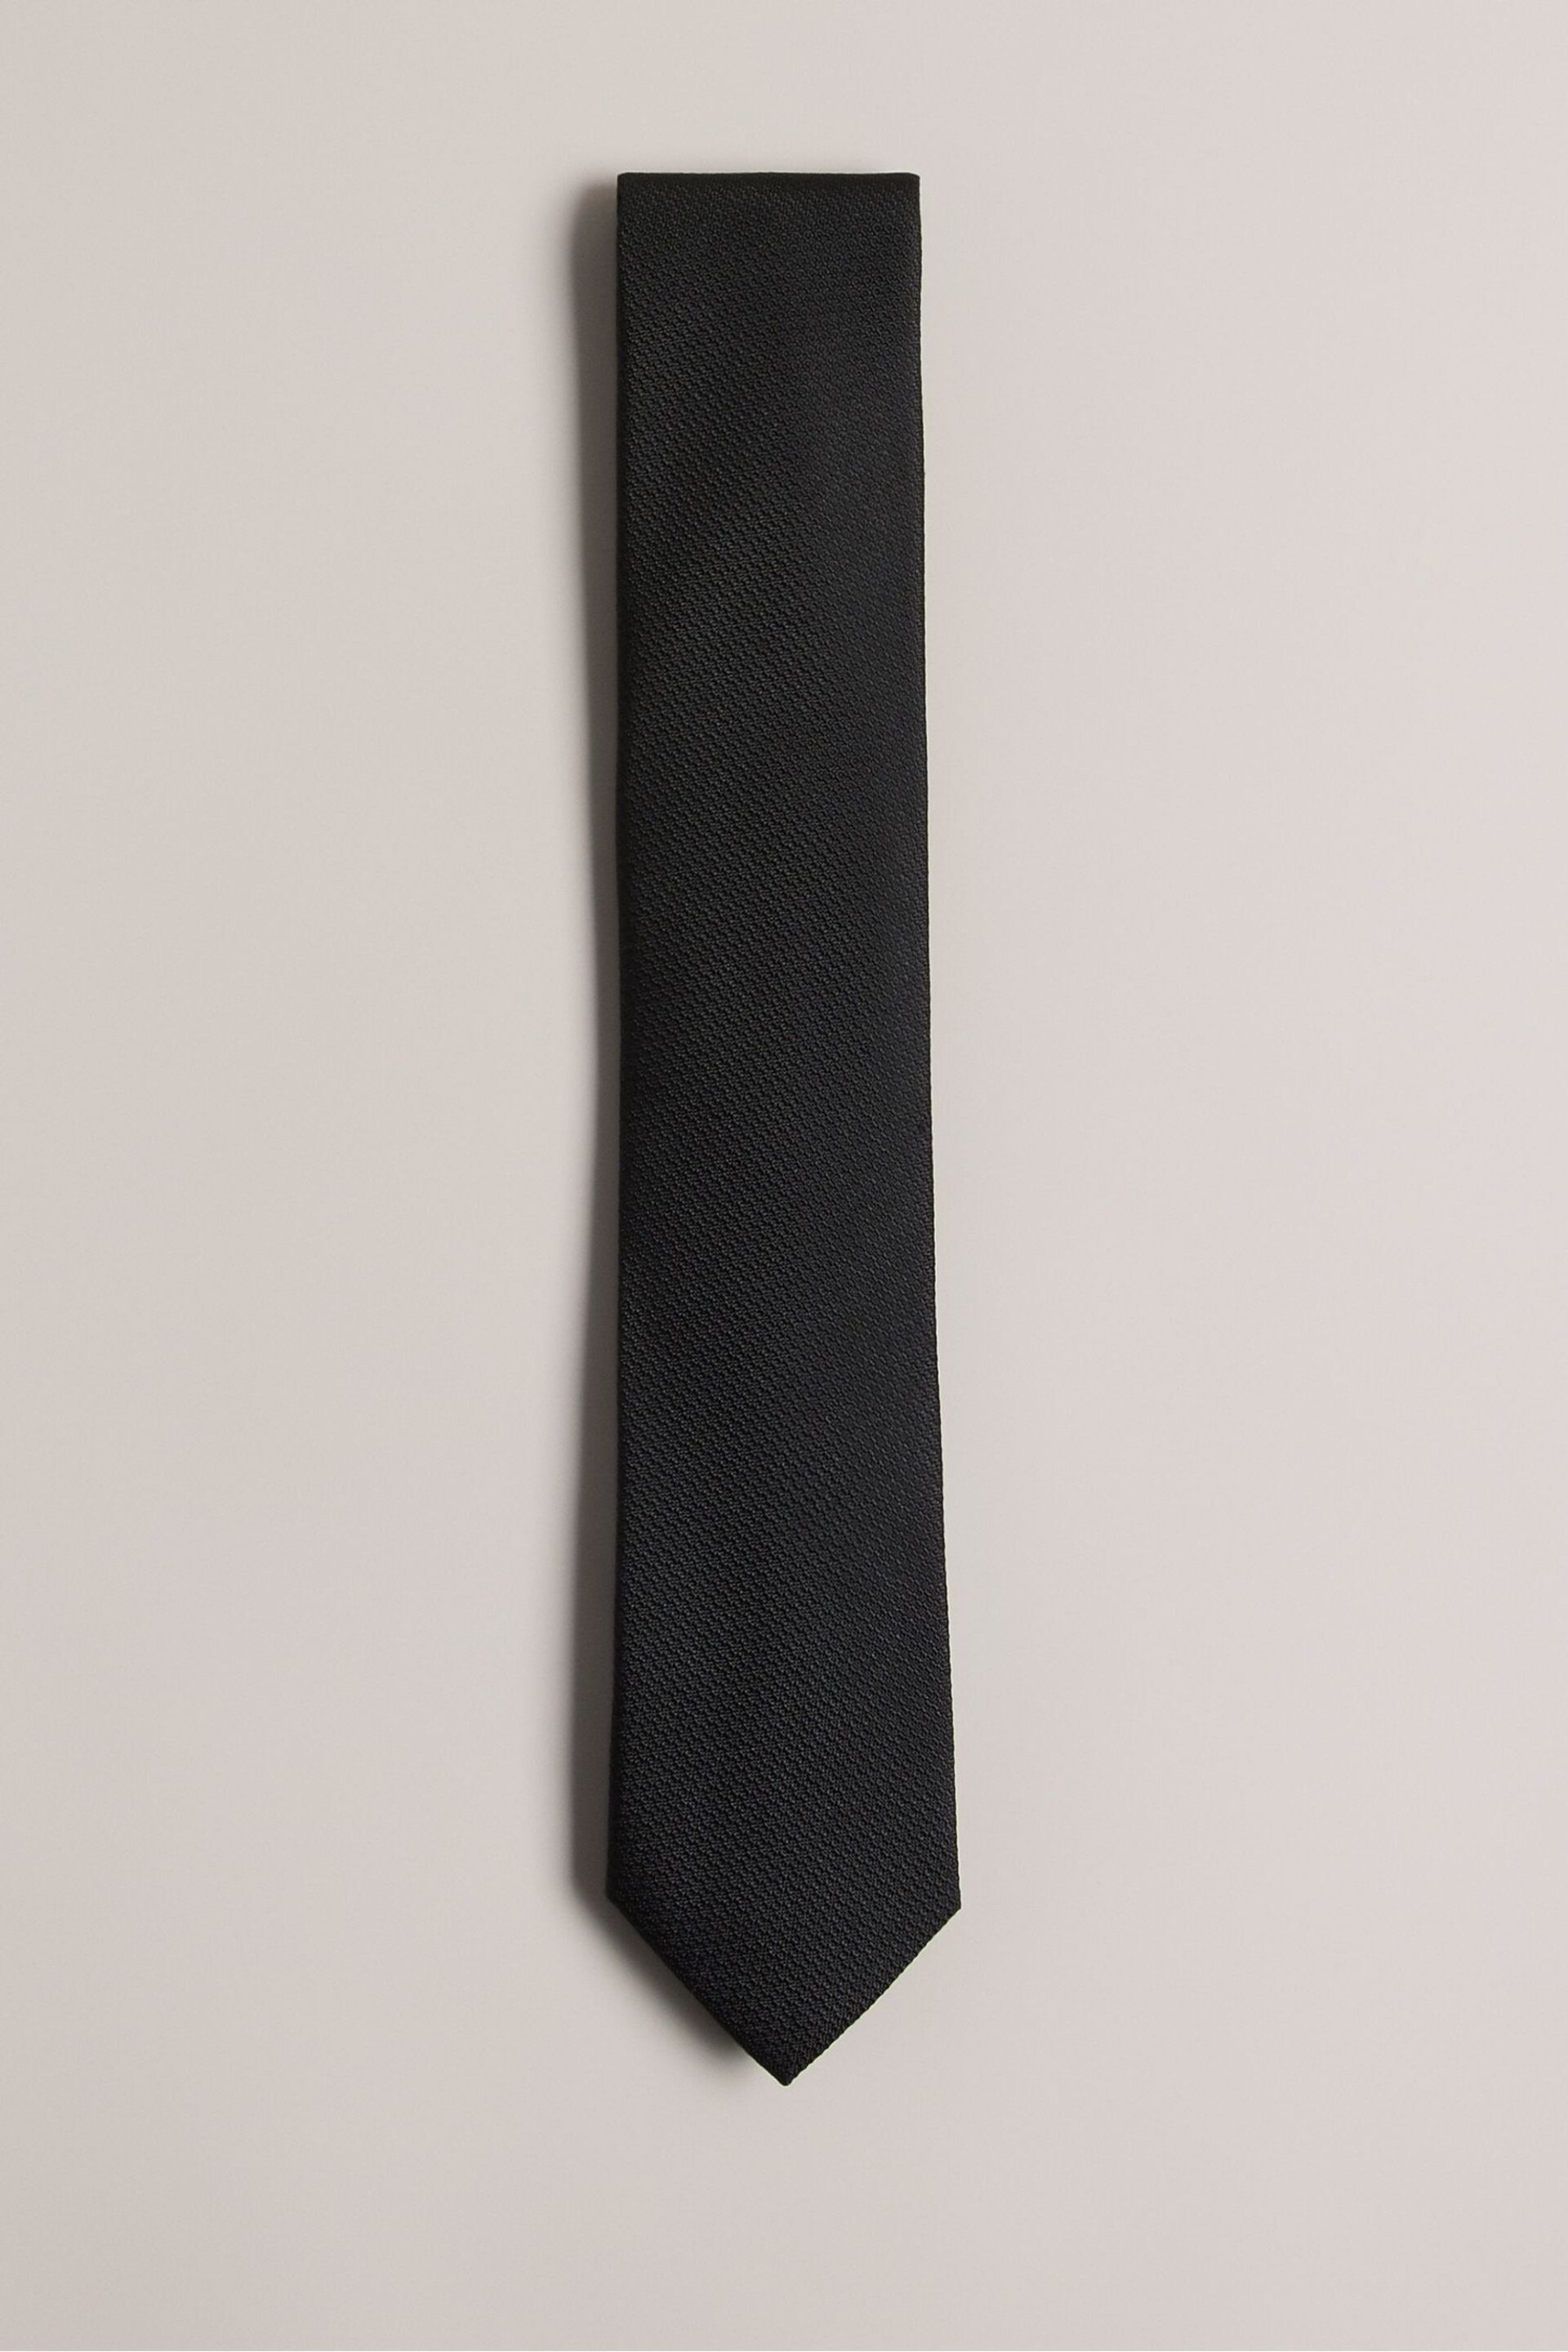 Ted Baker Black Phillo Textured Silk Tie - Image 1 of 4